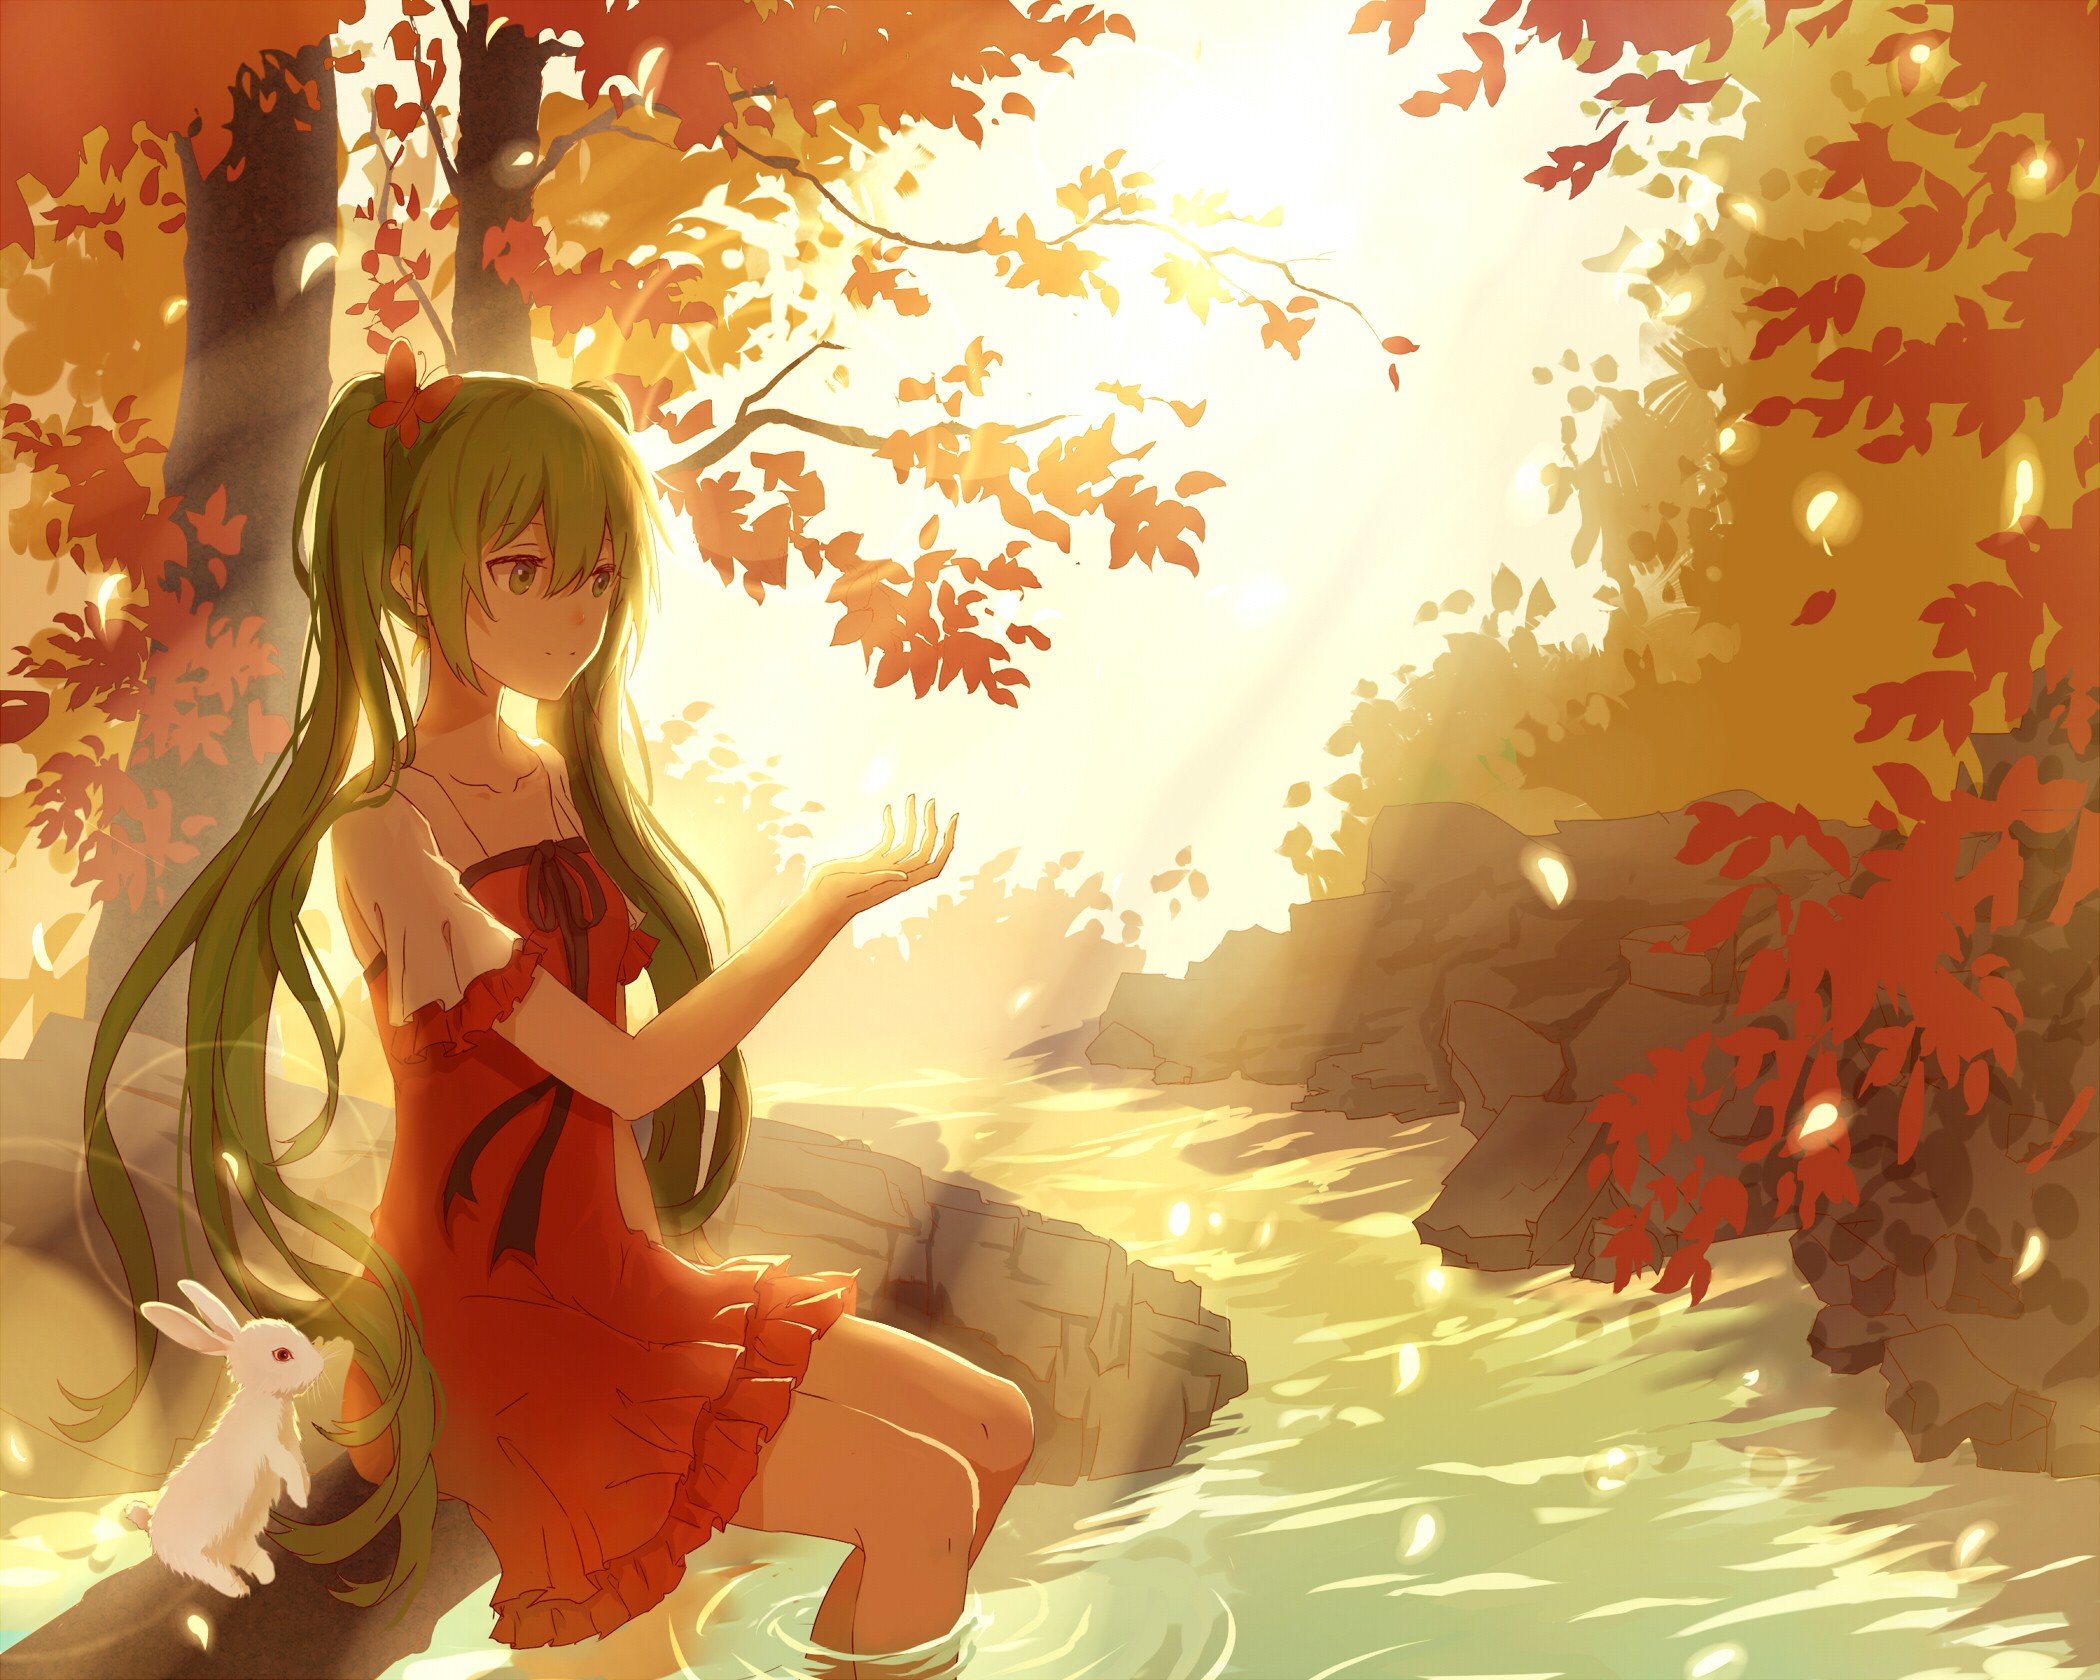 Vocaloid, Hatsune Miku, Red dress, Long hair, Twintails, Ribbon, Forest, Flower petals, Water, Rabbits, Butterfly, Trees, Anime girls, Anime Wallpaper